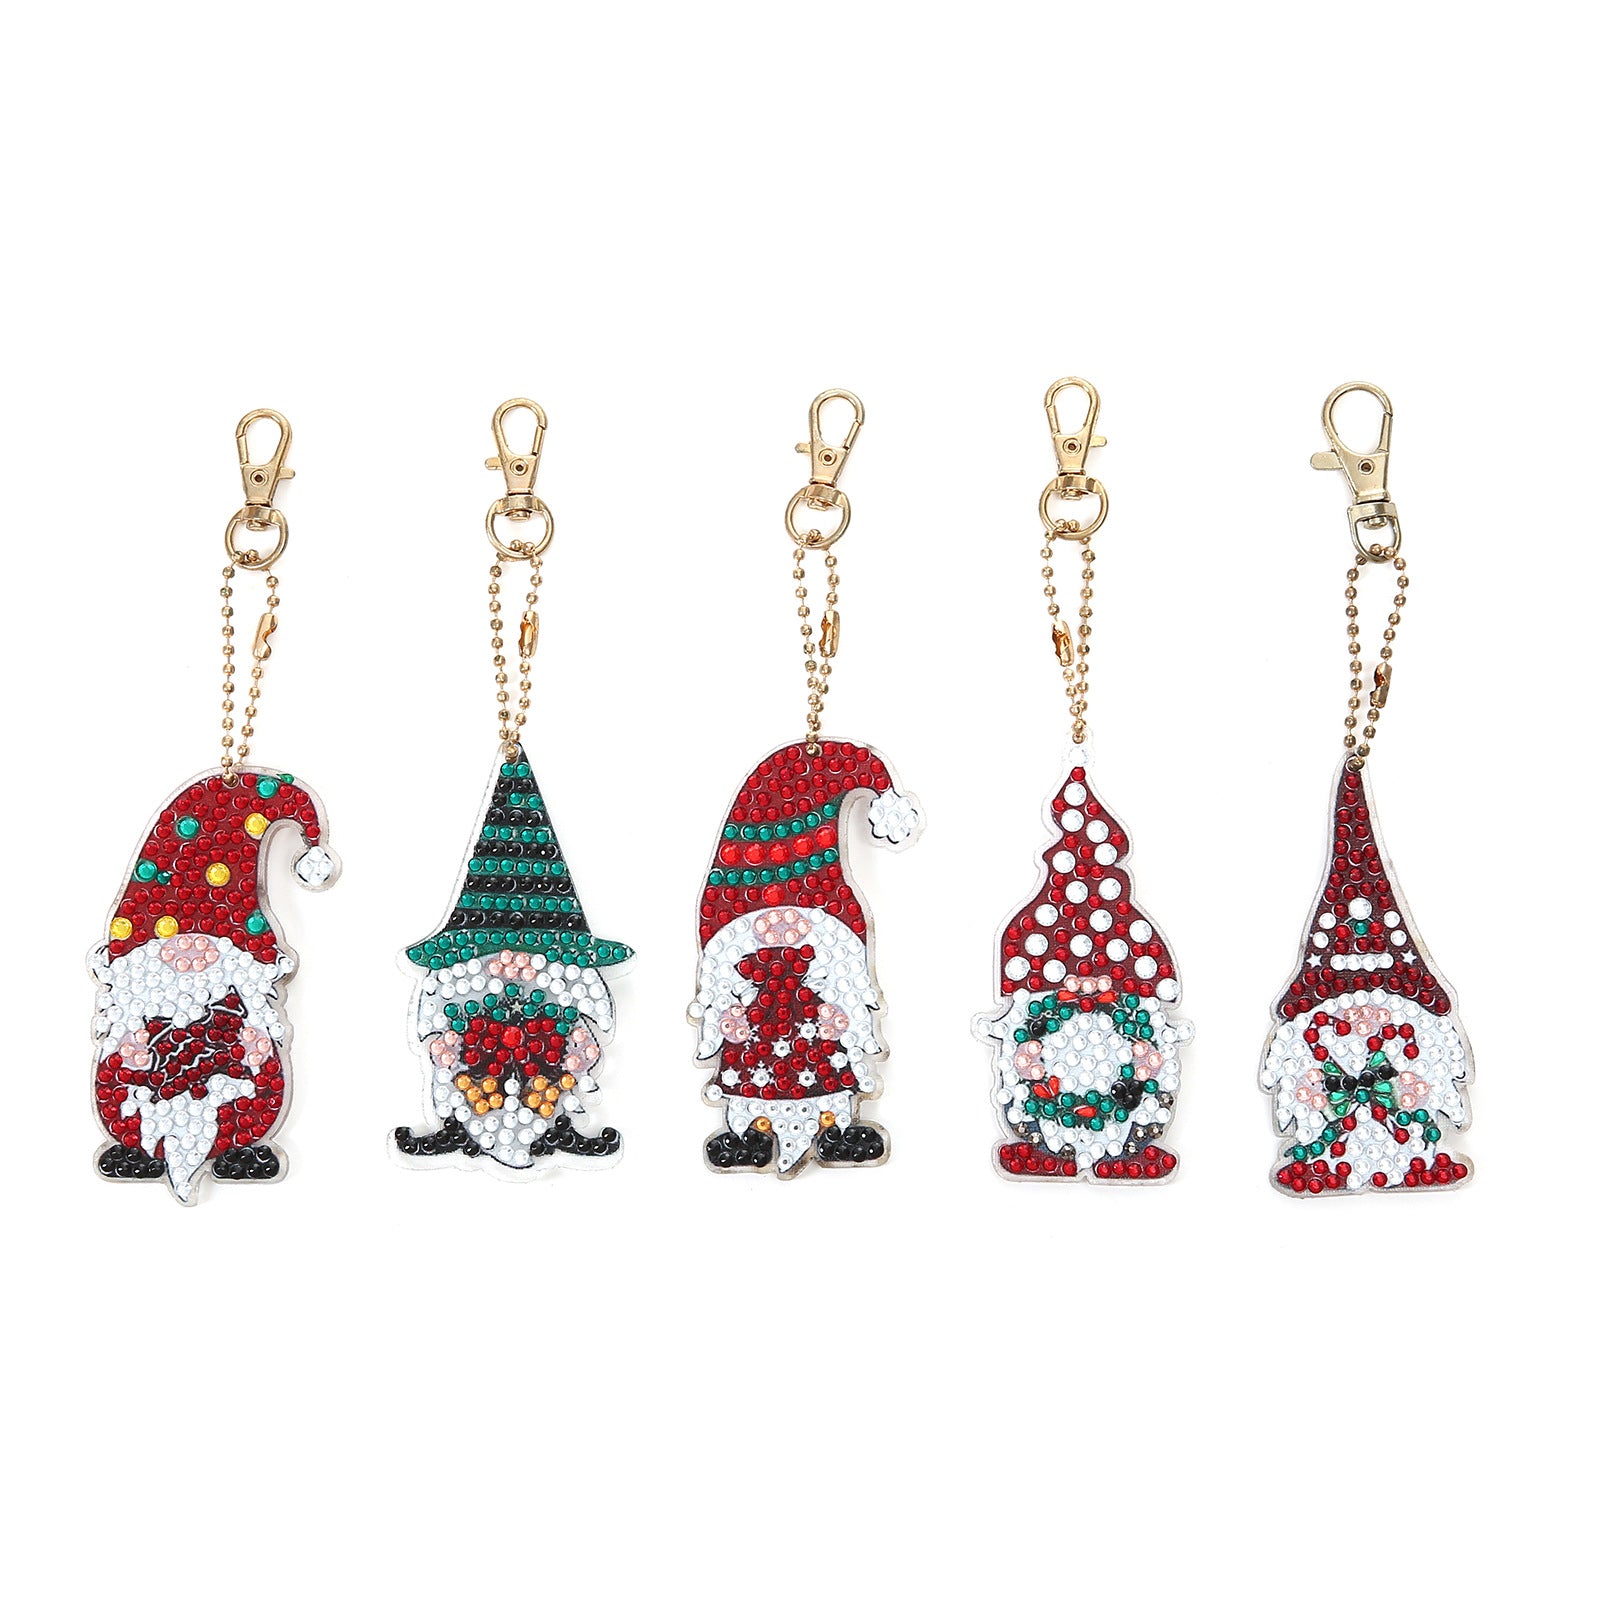 Full Diamond Christmas Keychain Outdoor and Indoor Christmas decorations Items, Christmas ornaments, Christmas tree decorations, salt dough ornaments, Christmas window decorations, cheap Christmas decorations, snowmen, and ornaments.